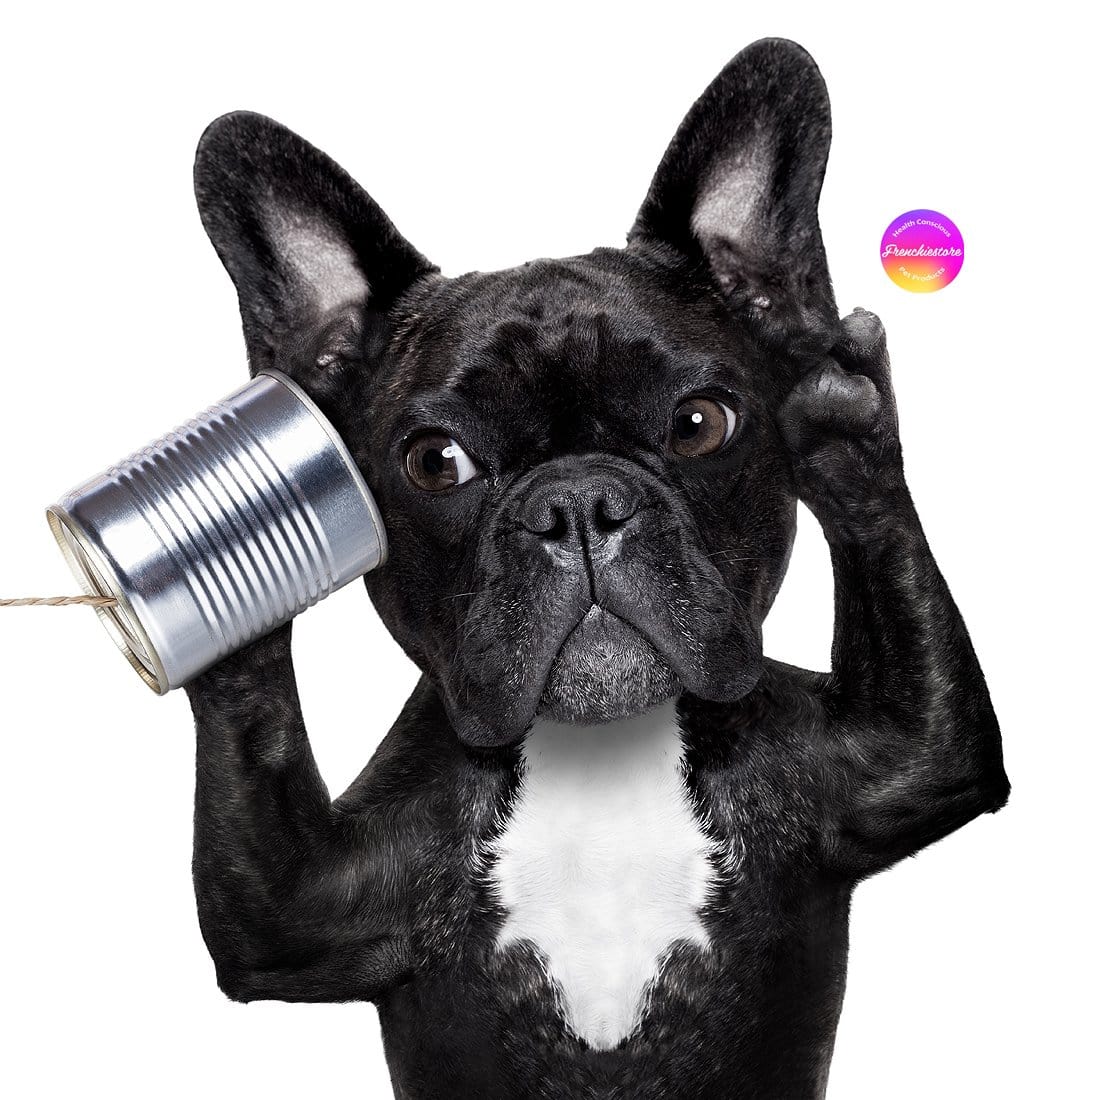 BLACK DEAF FRENCHIE HOLDING A CAN TO HIS EAR AND TRYING TO LISTEN